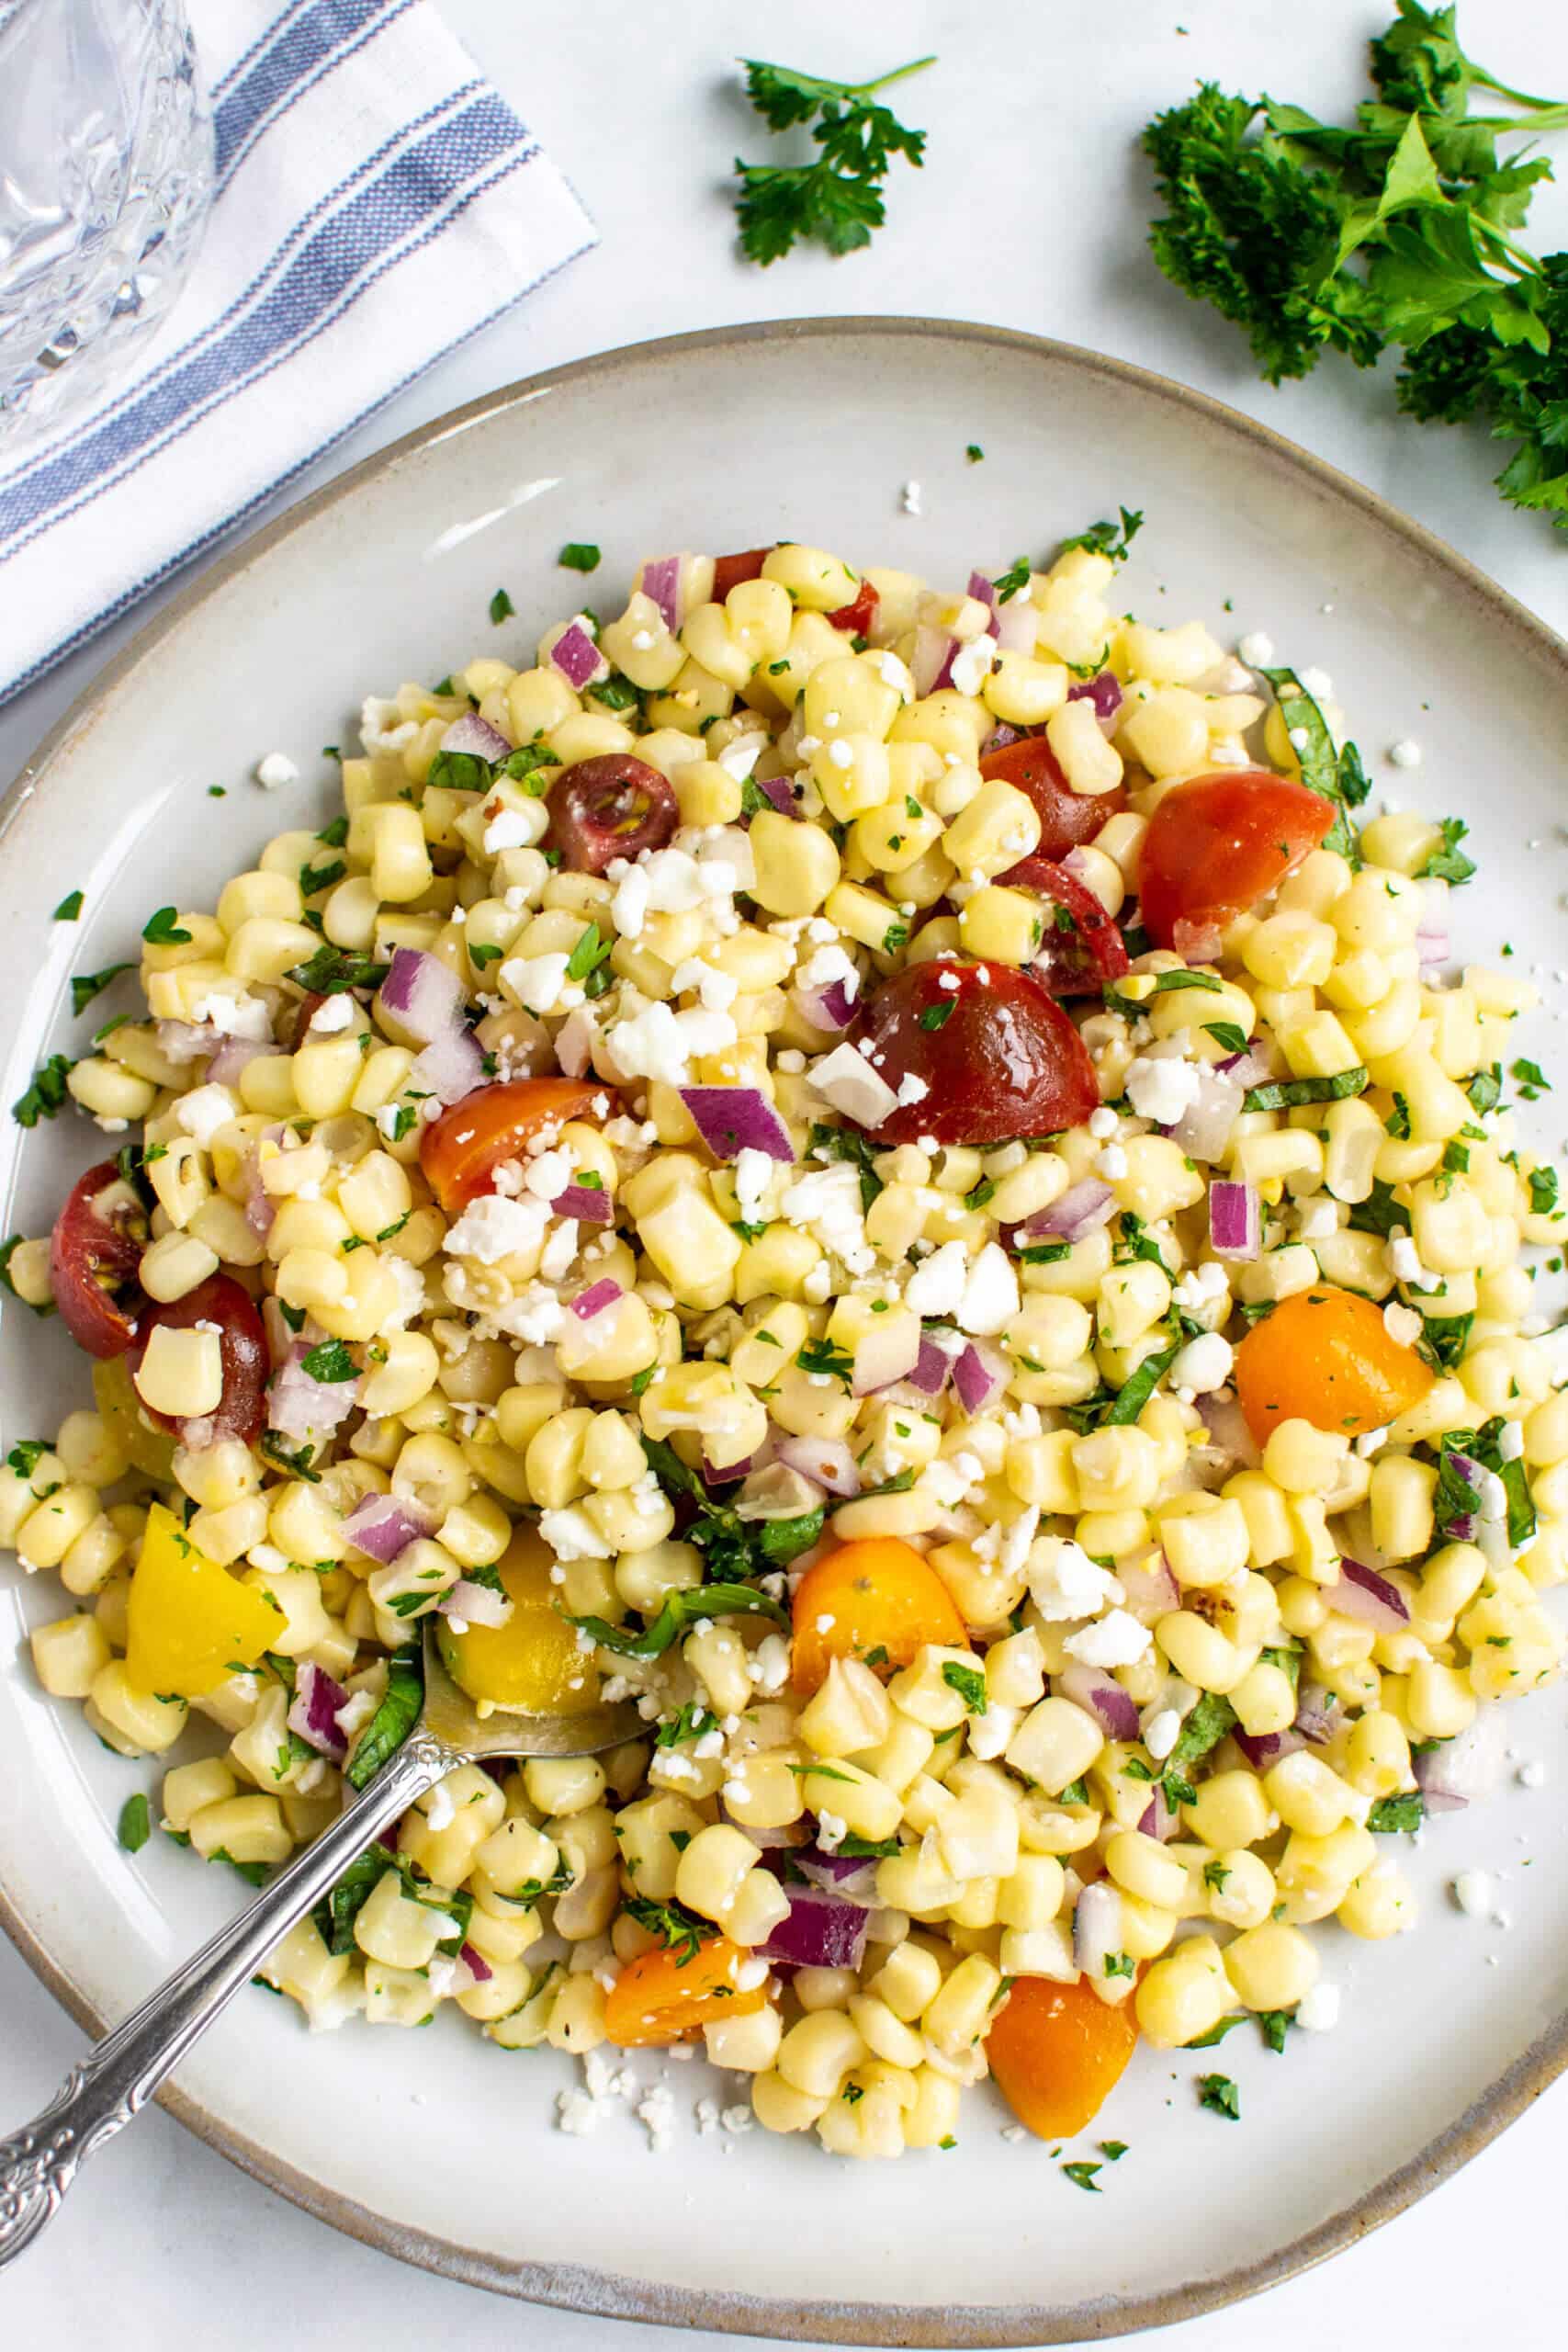 Sweet corn salad on a plate with a fork